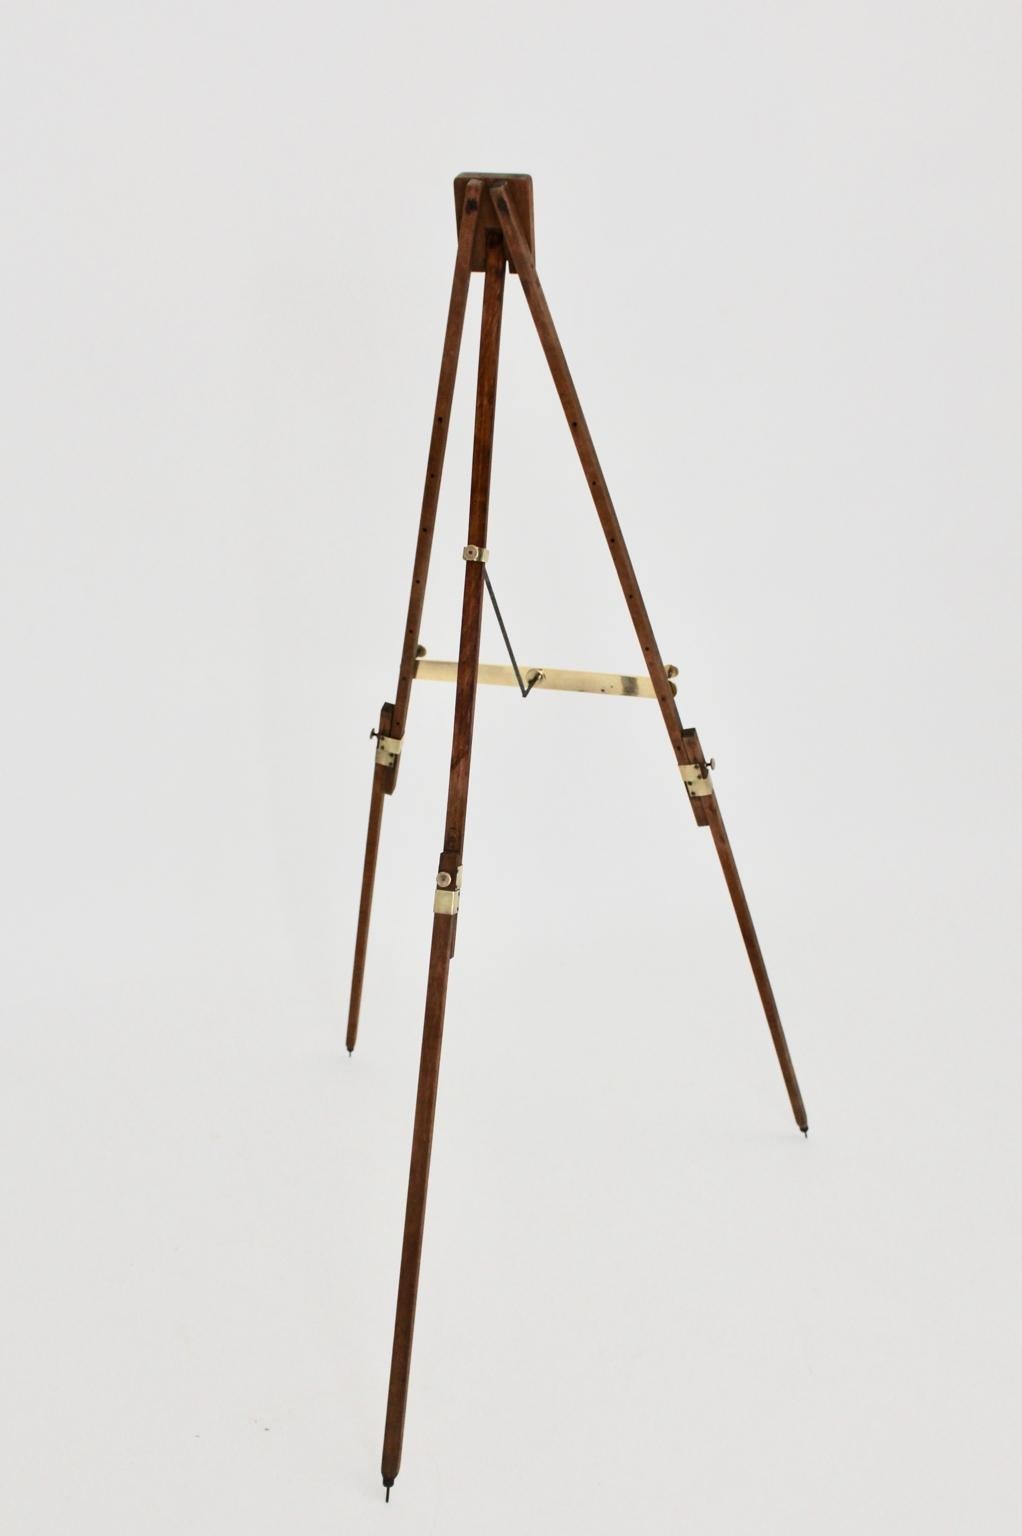 This rare easel is something special and great for landscape painter - it is foldable and adjustable for taking away.
Each of the feet is individually to adjust - especially practical for impassable terrain.

The easel is also foldable and so it is